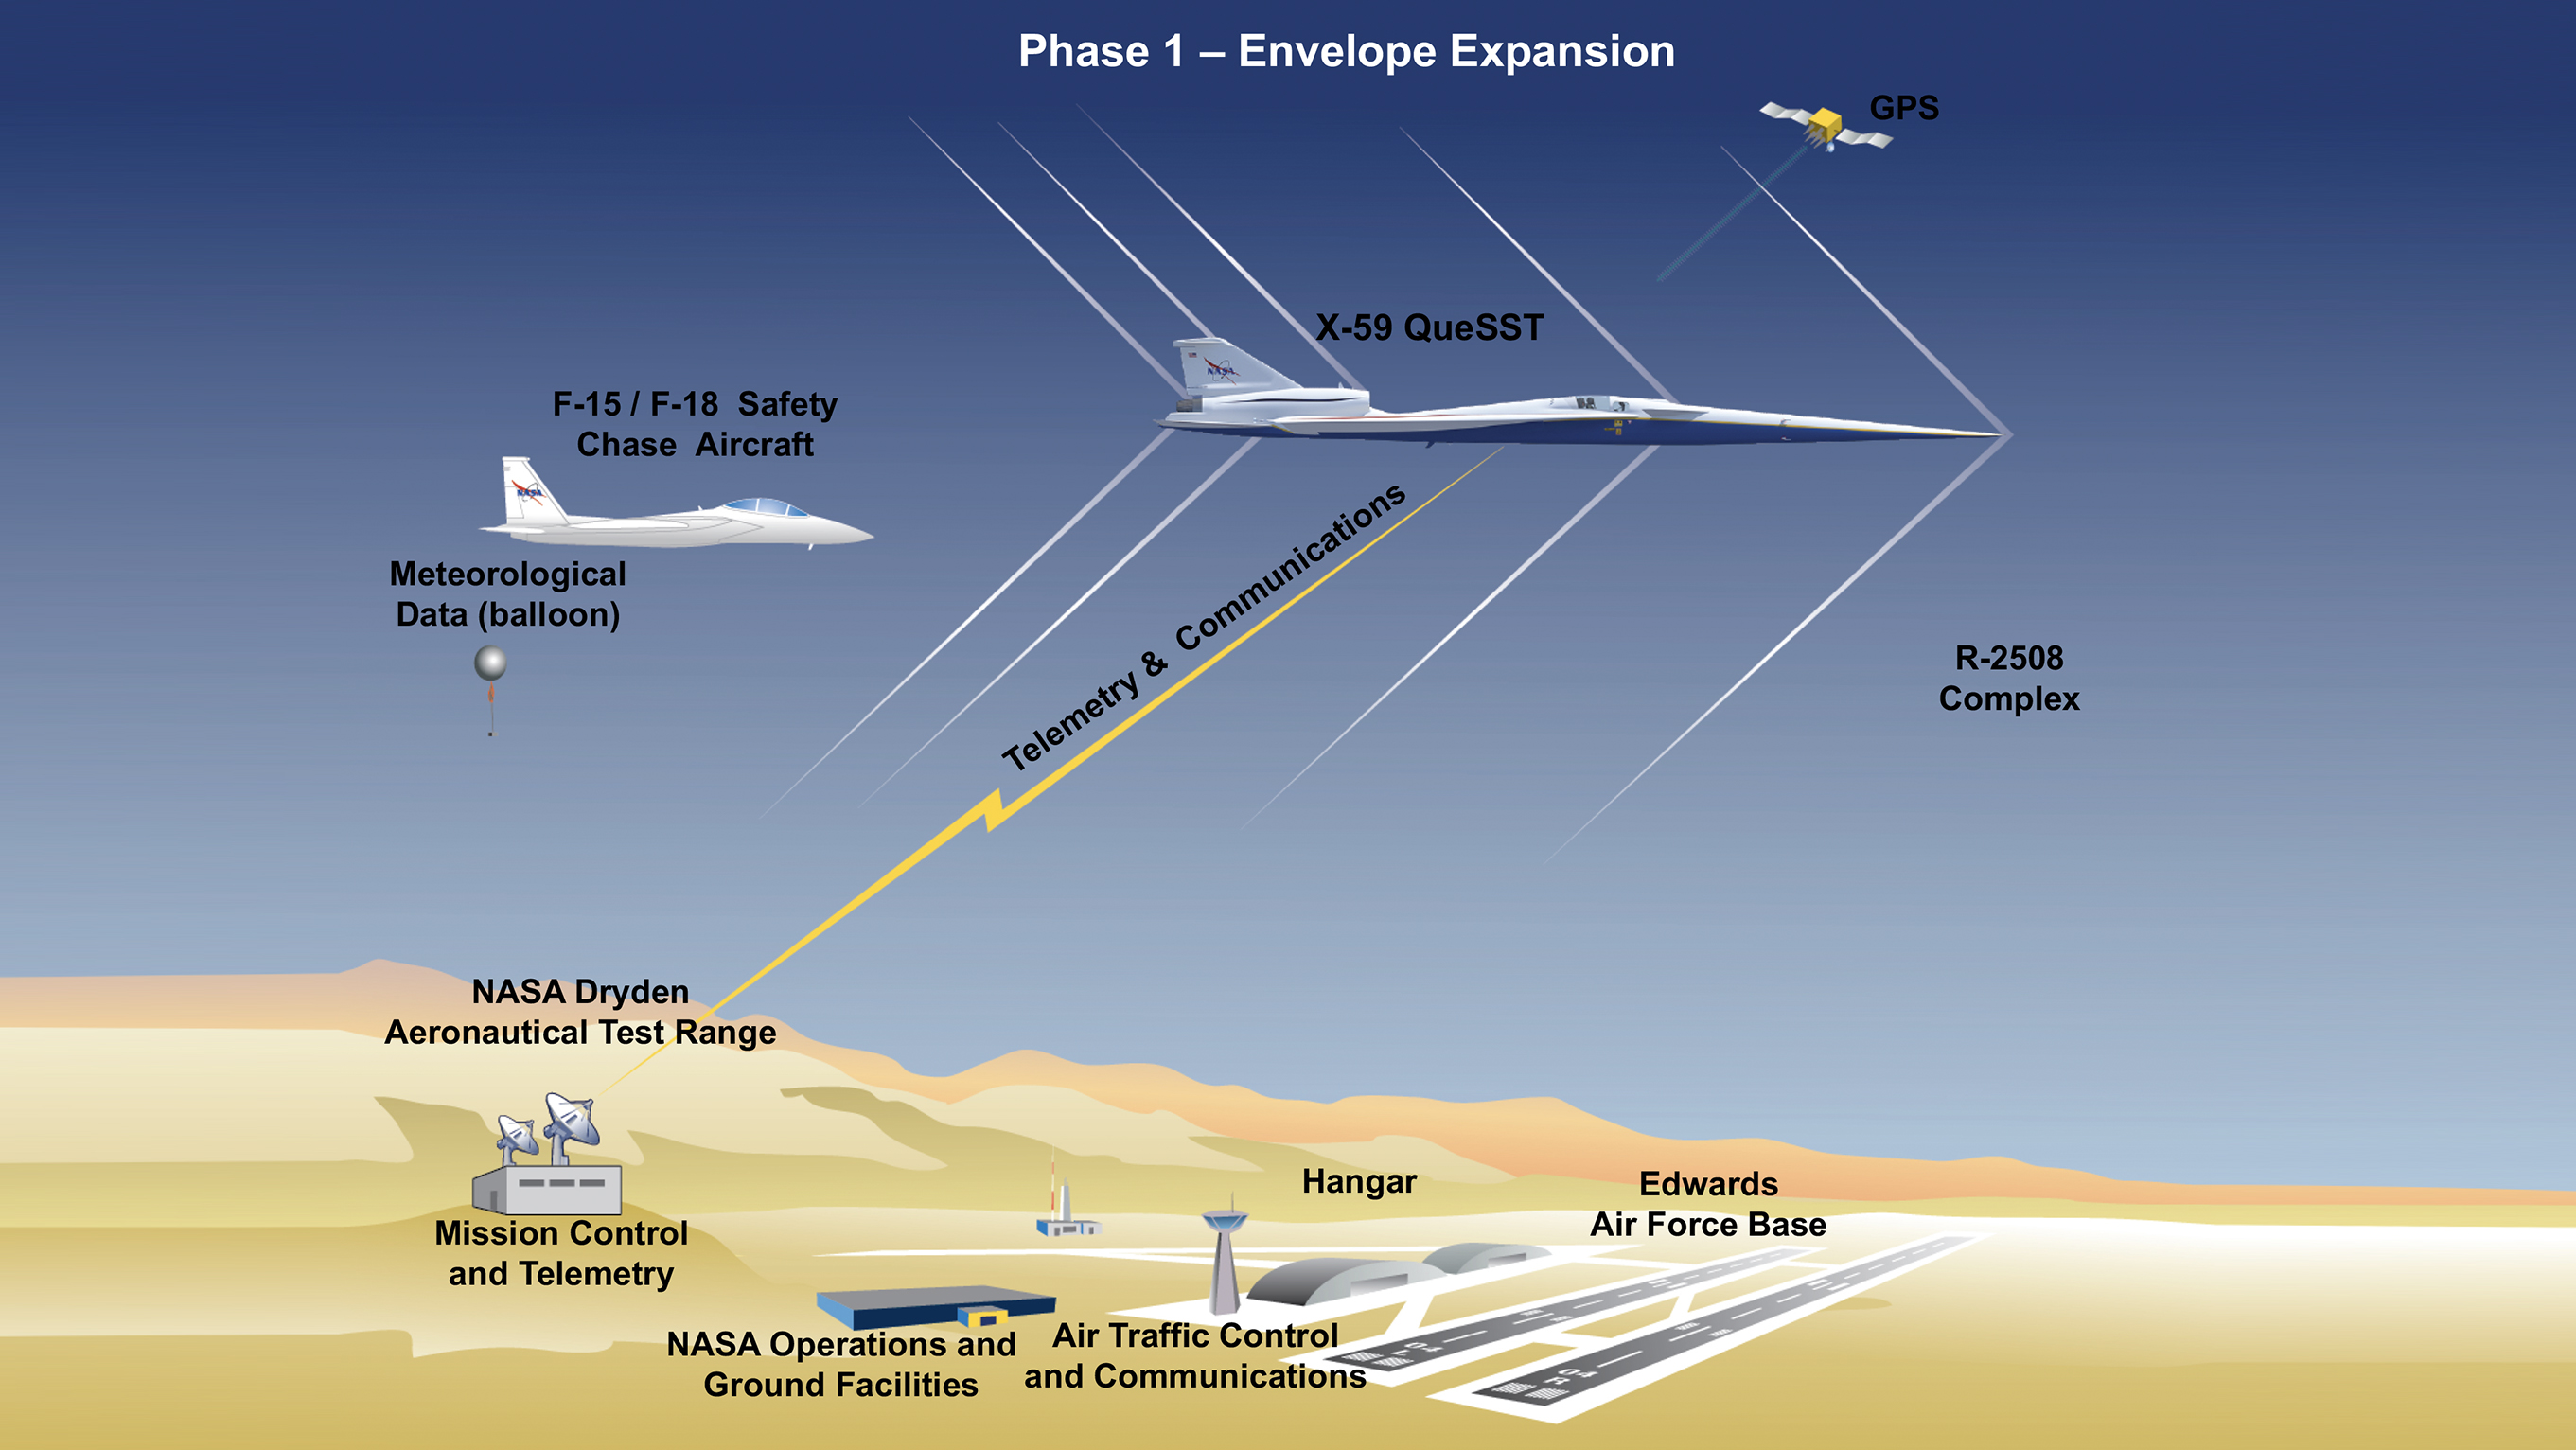 Artist illustration of Phase 1-3 of the X-59, showing testing of the X-59 capabilities by expanding operations.